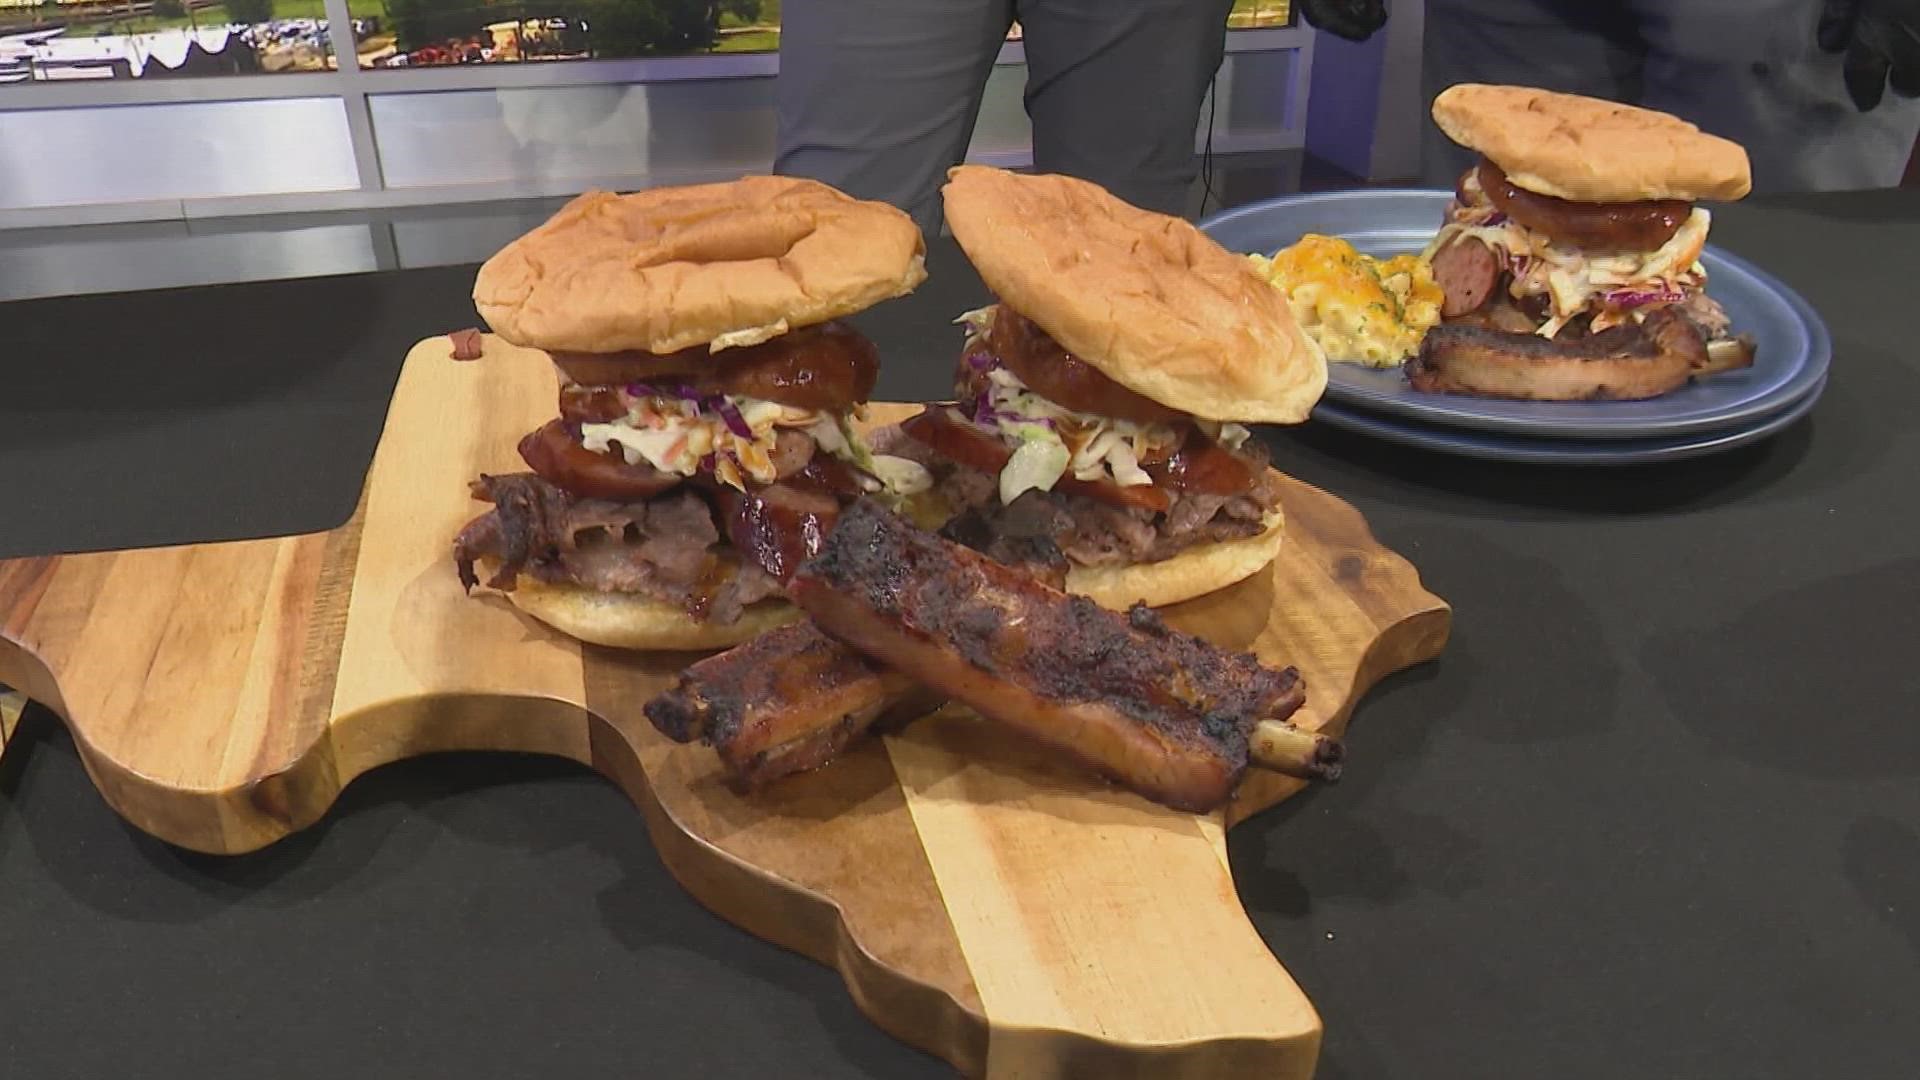 Smokey John's took the local title on Good Morning America this week. They also brought a special dish for Tashara Parker to try (sorry, Mariel!)